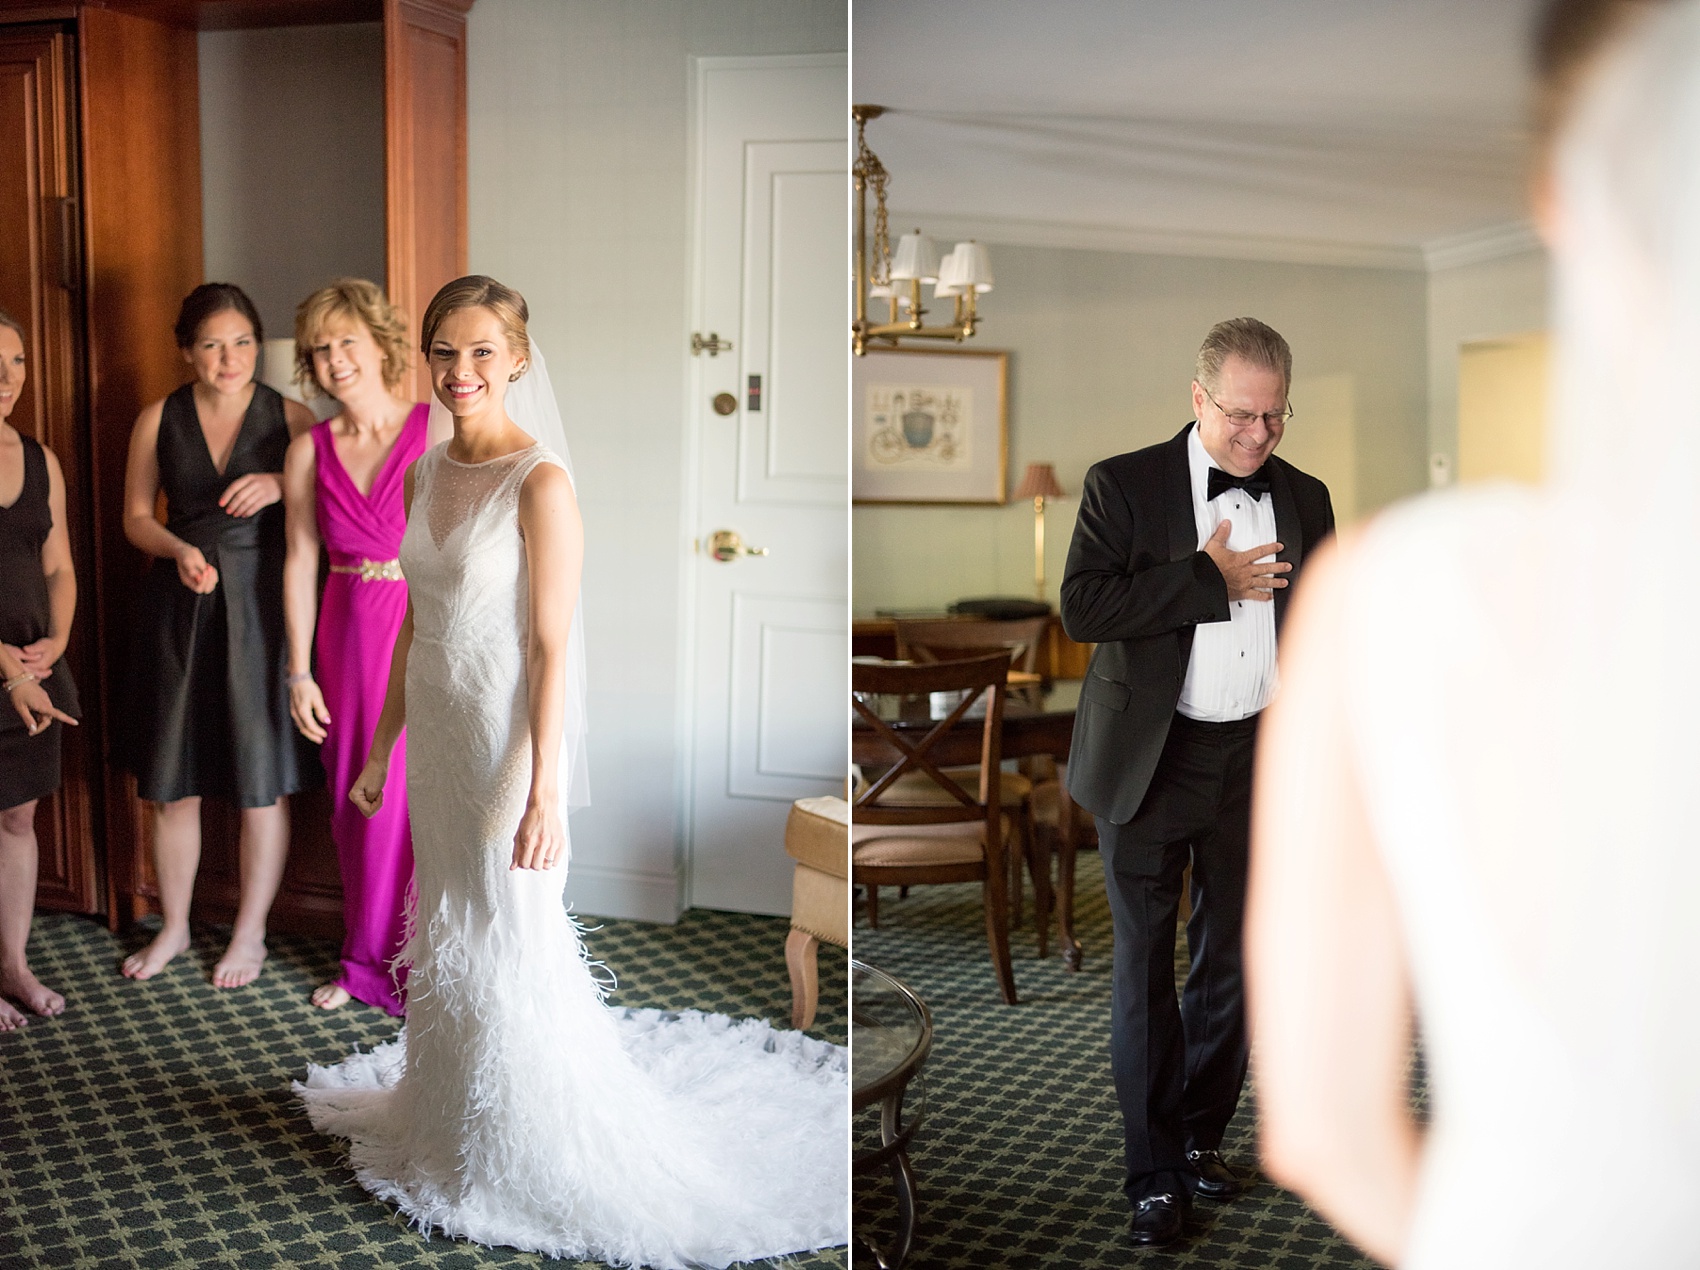 Pearl River Hilton wedding photos. Wedding gown with feathers by Rosa Clara Soft. Images by Mikkel Paige Photography, NYC wedding photographer.